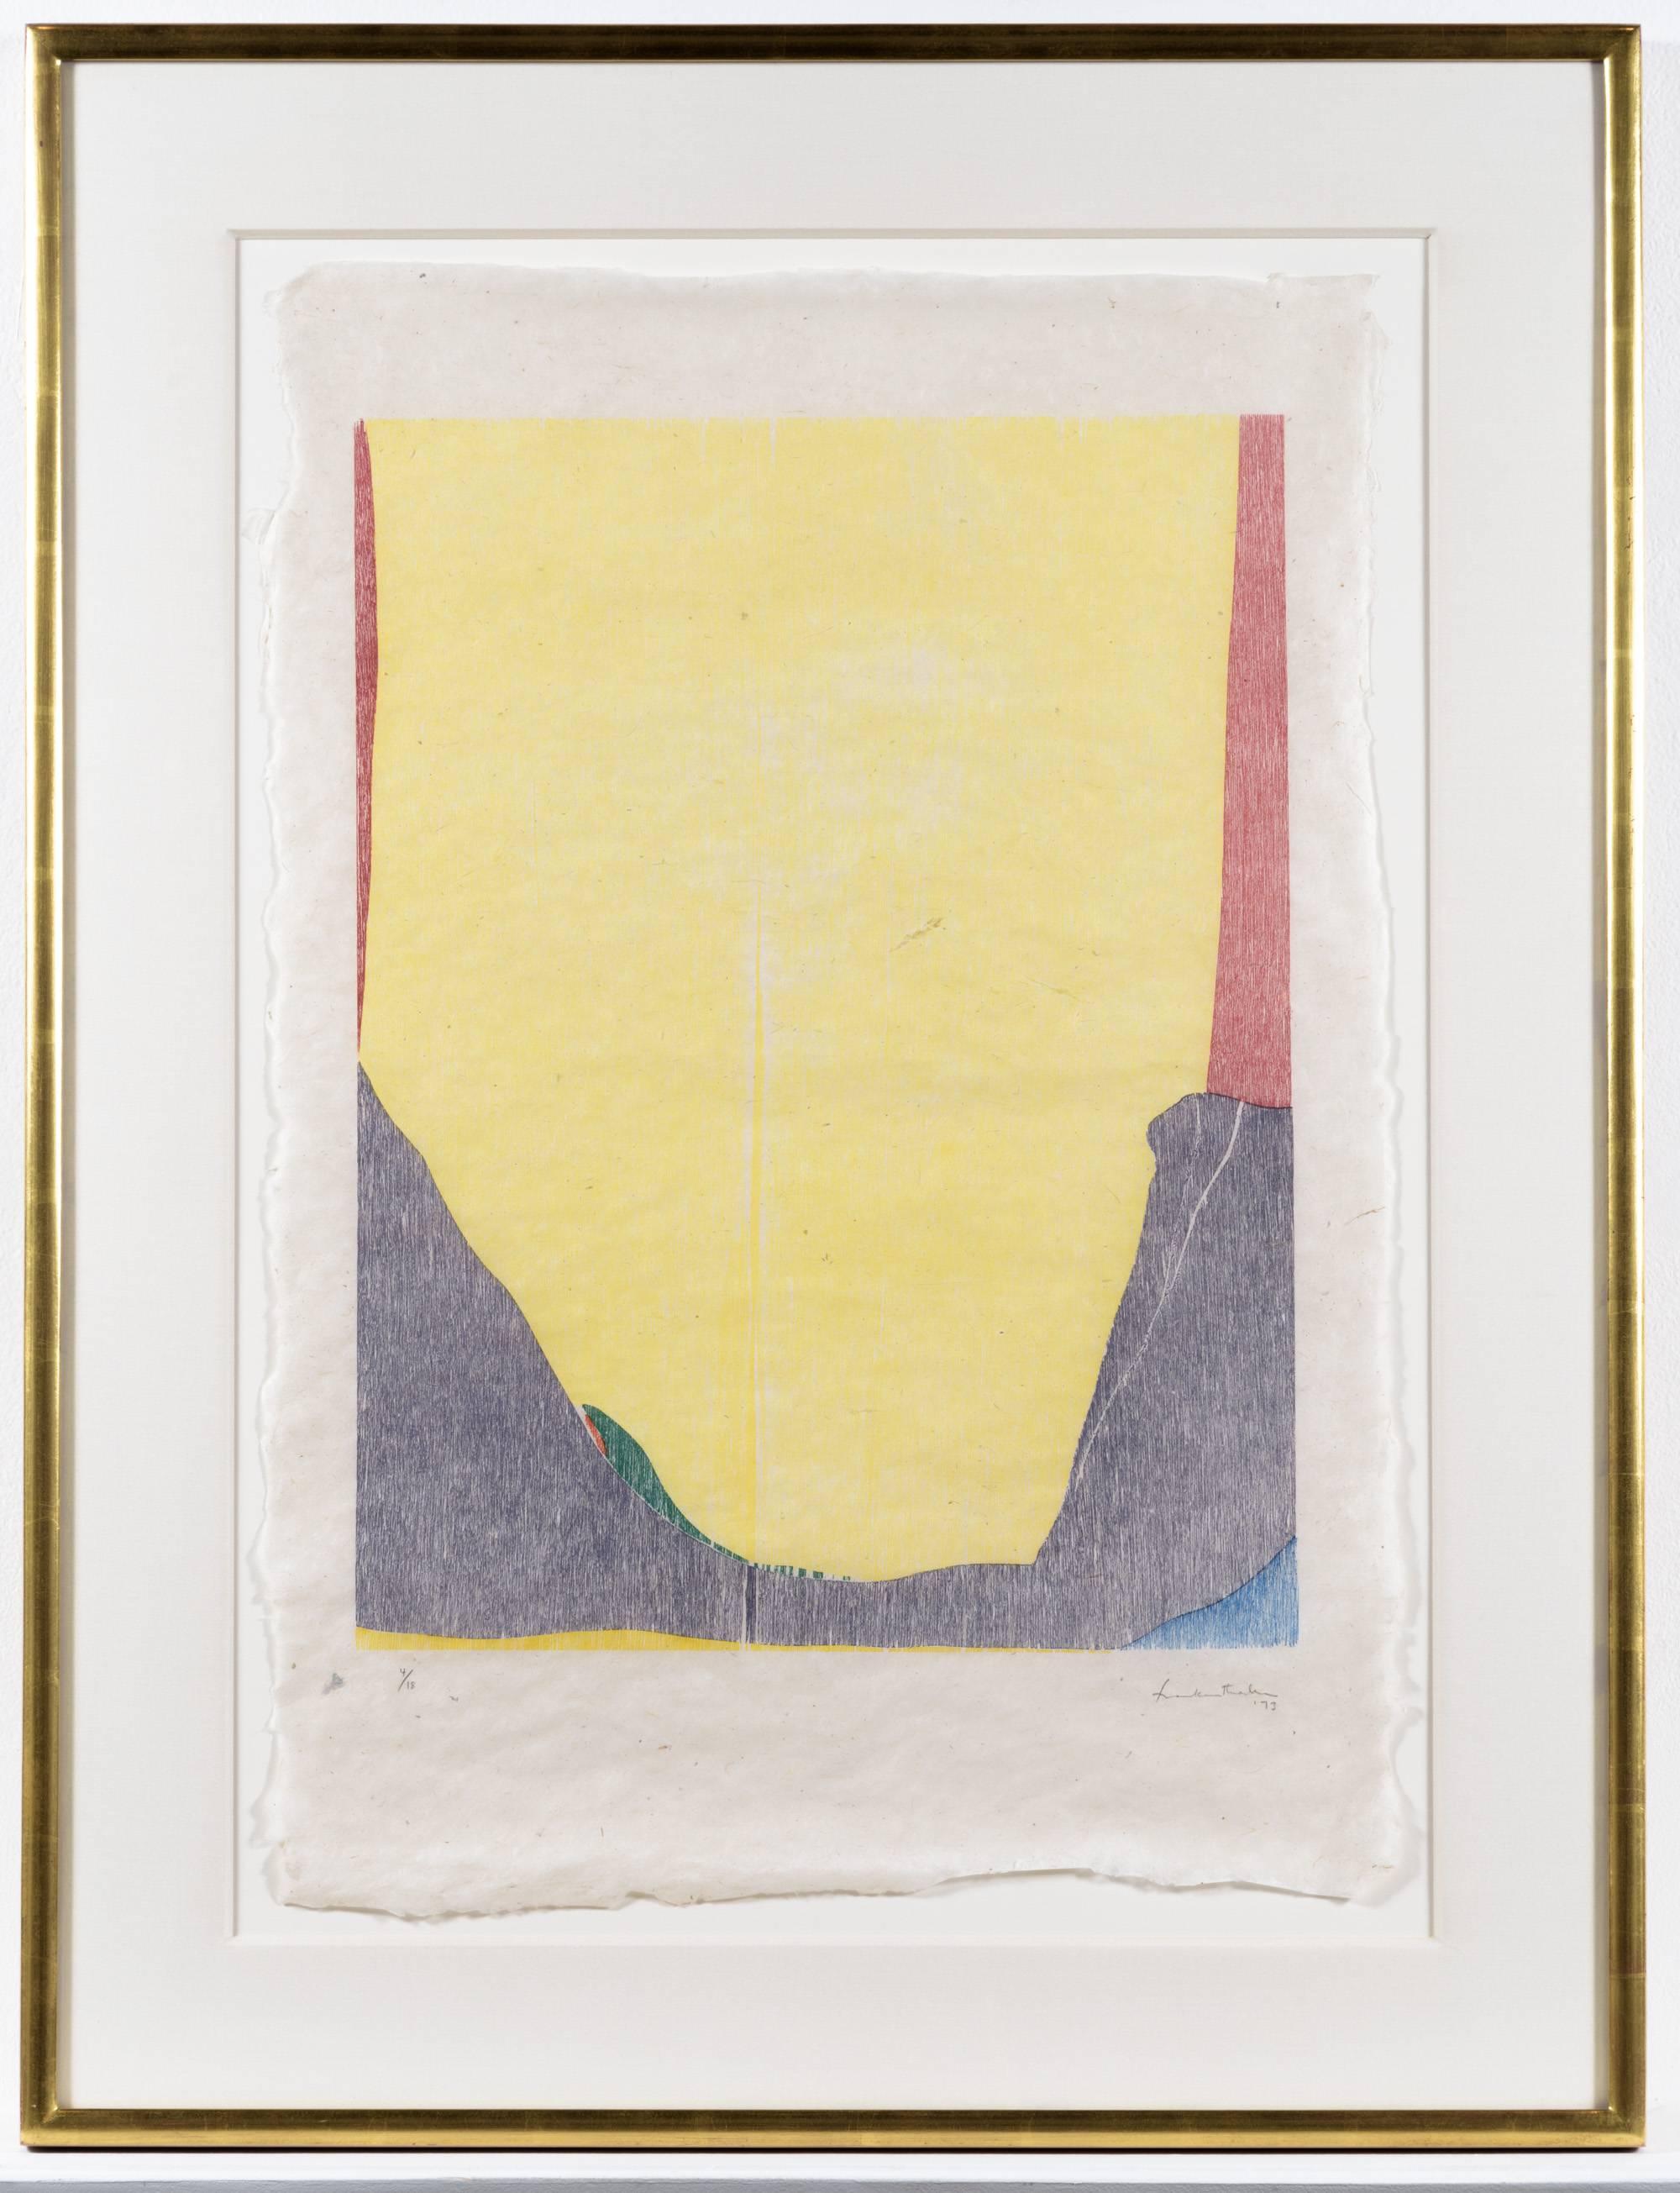 East and Beyond - Contemporary Print by Helen Frankenthaler